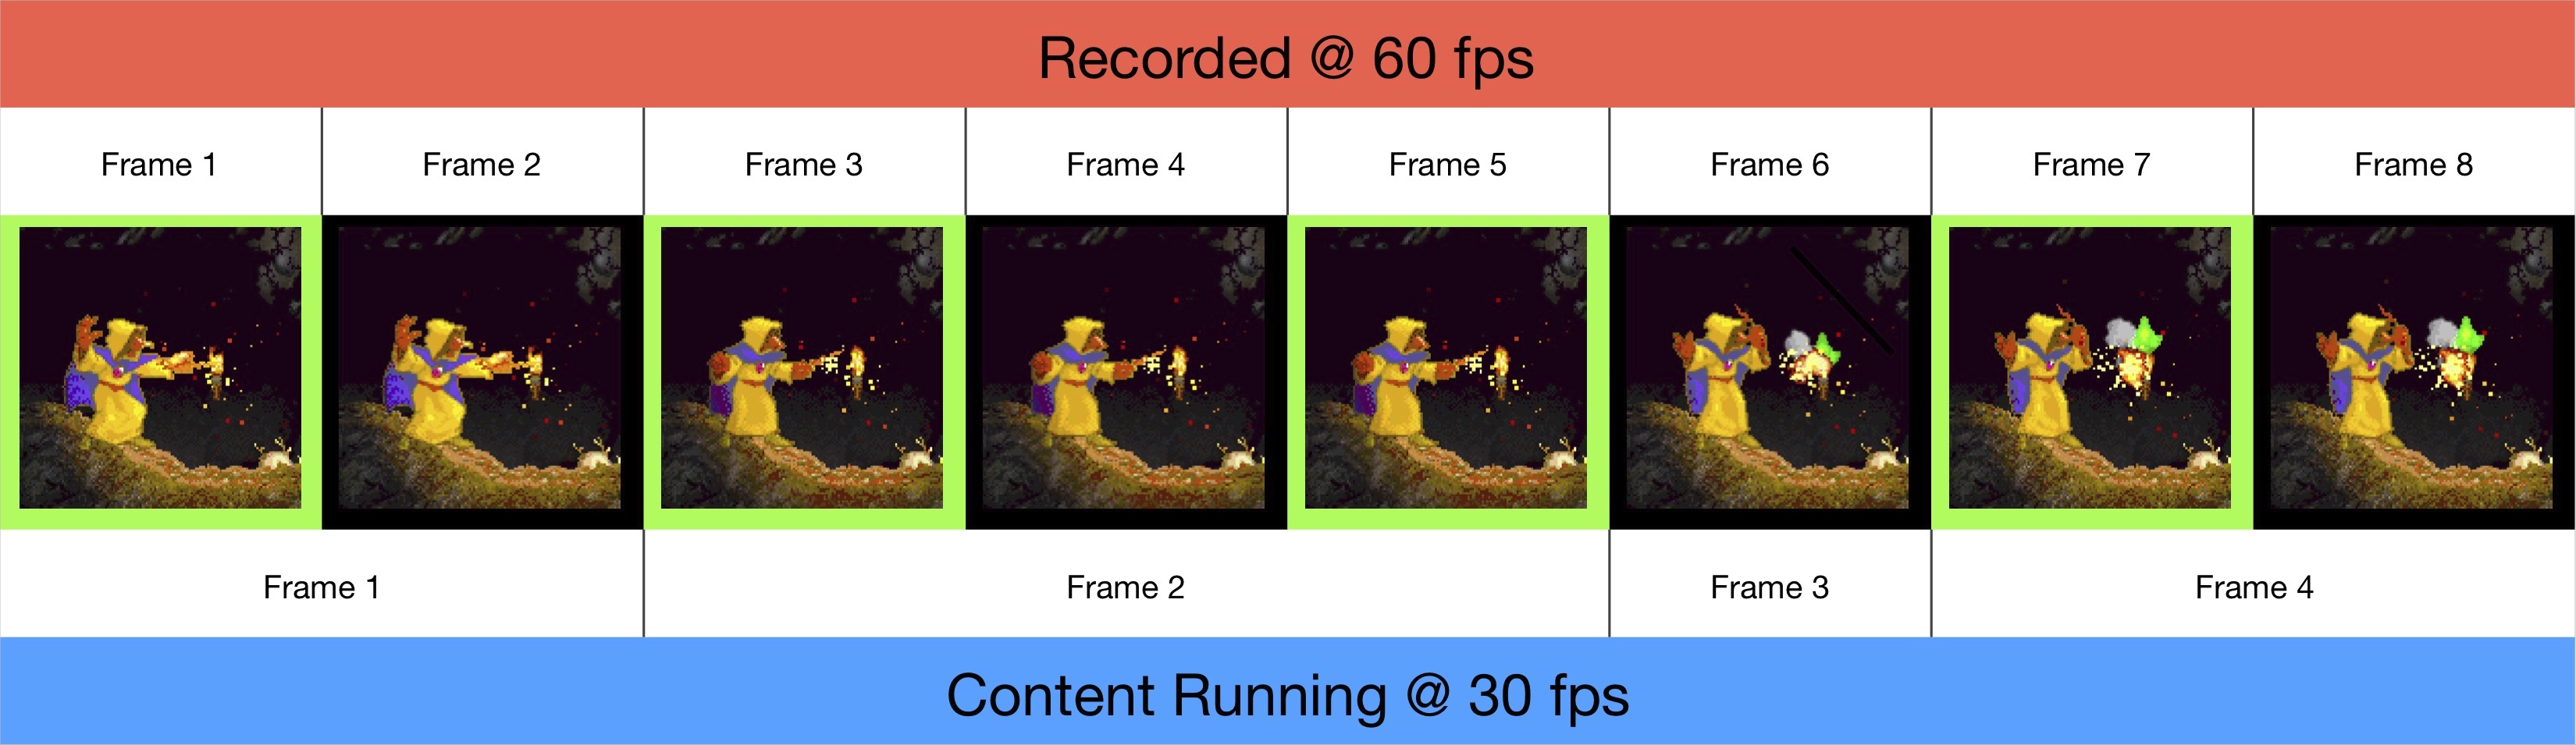 60fps video of 30fps content doesn't mean every frame is repeated exactly twice